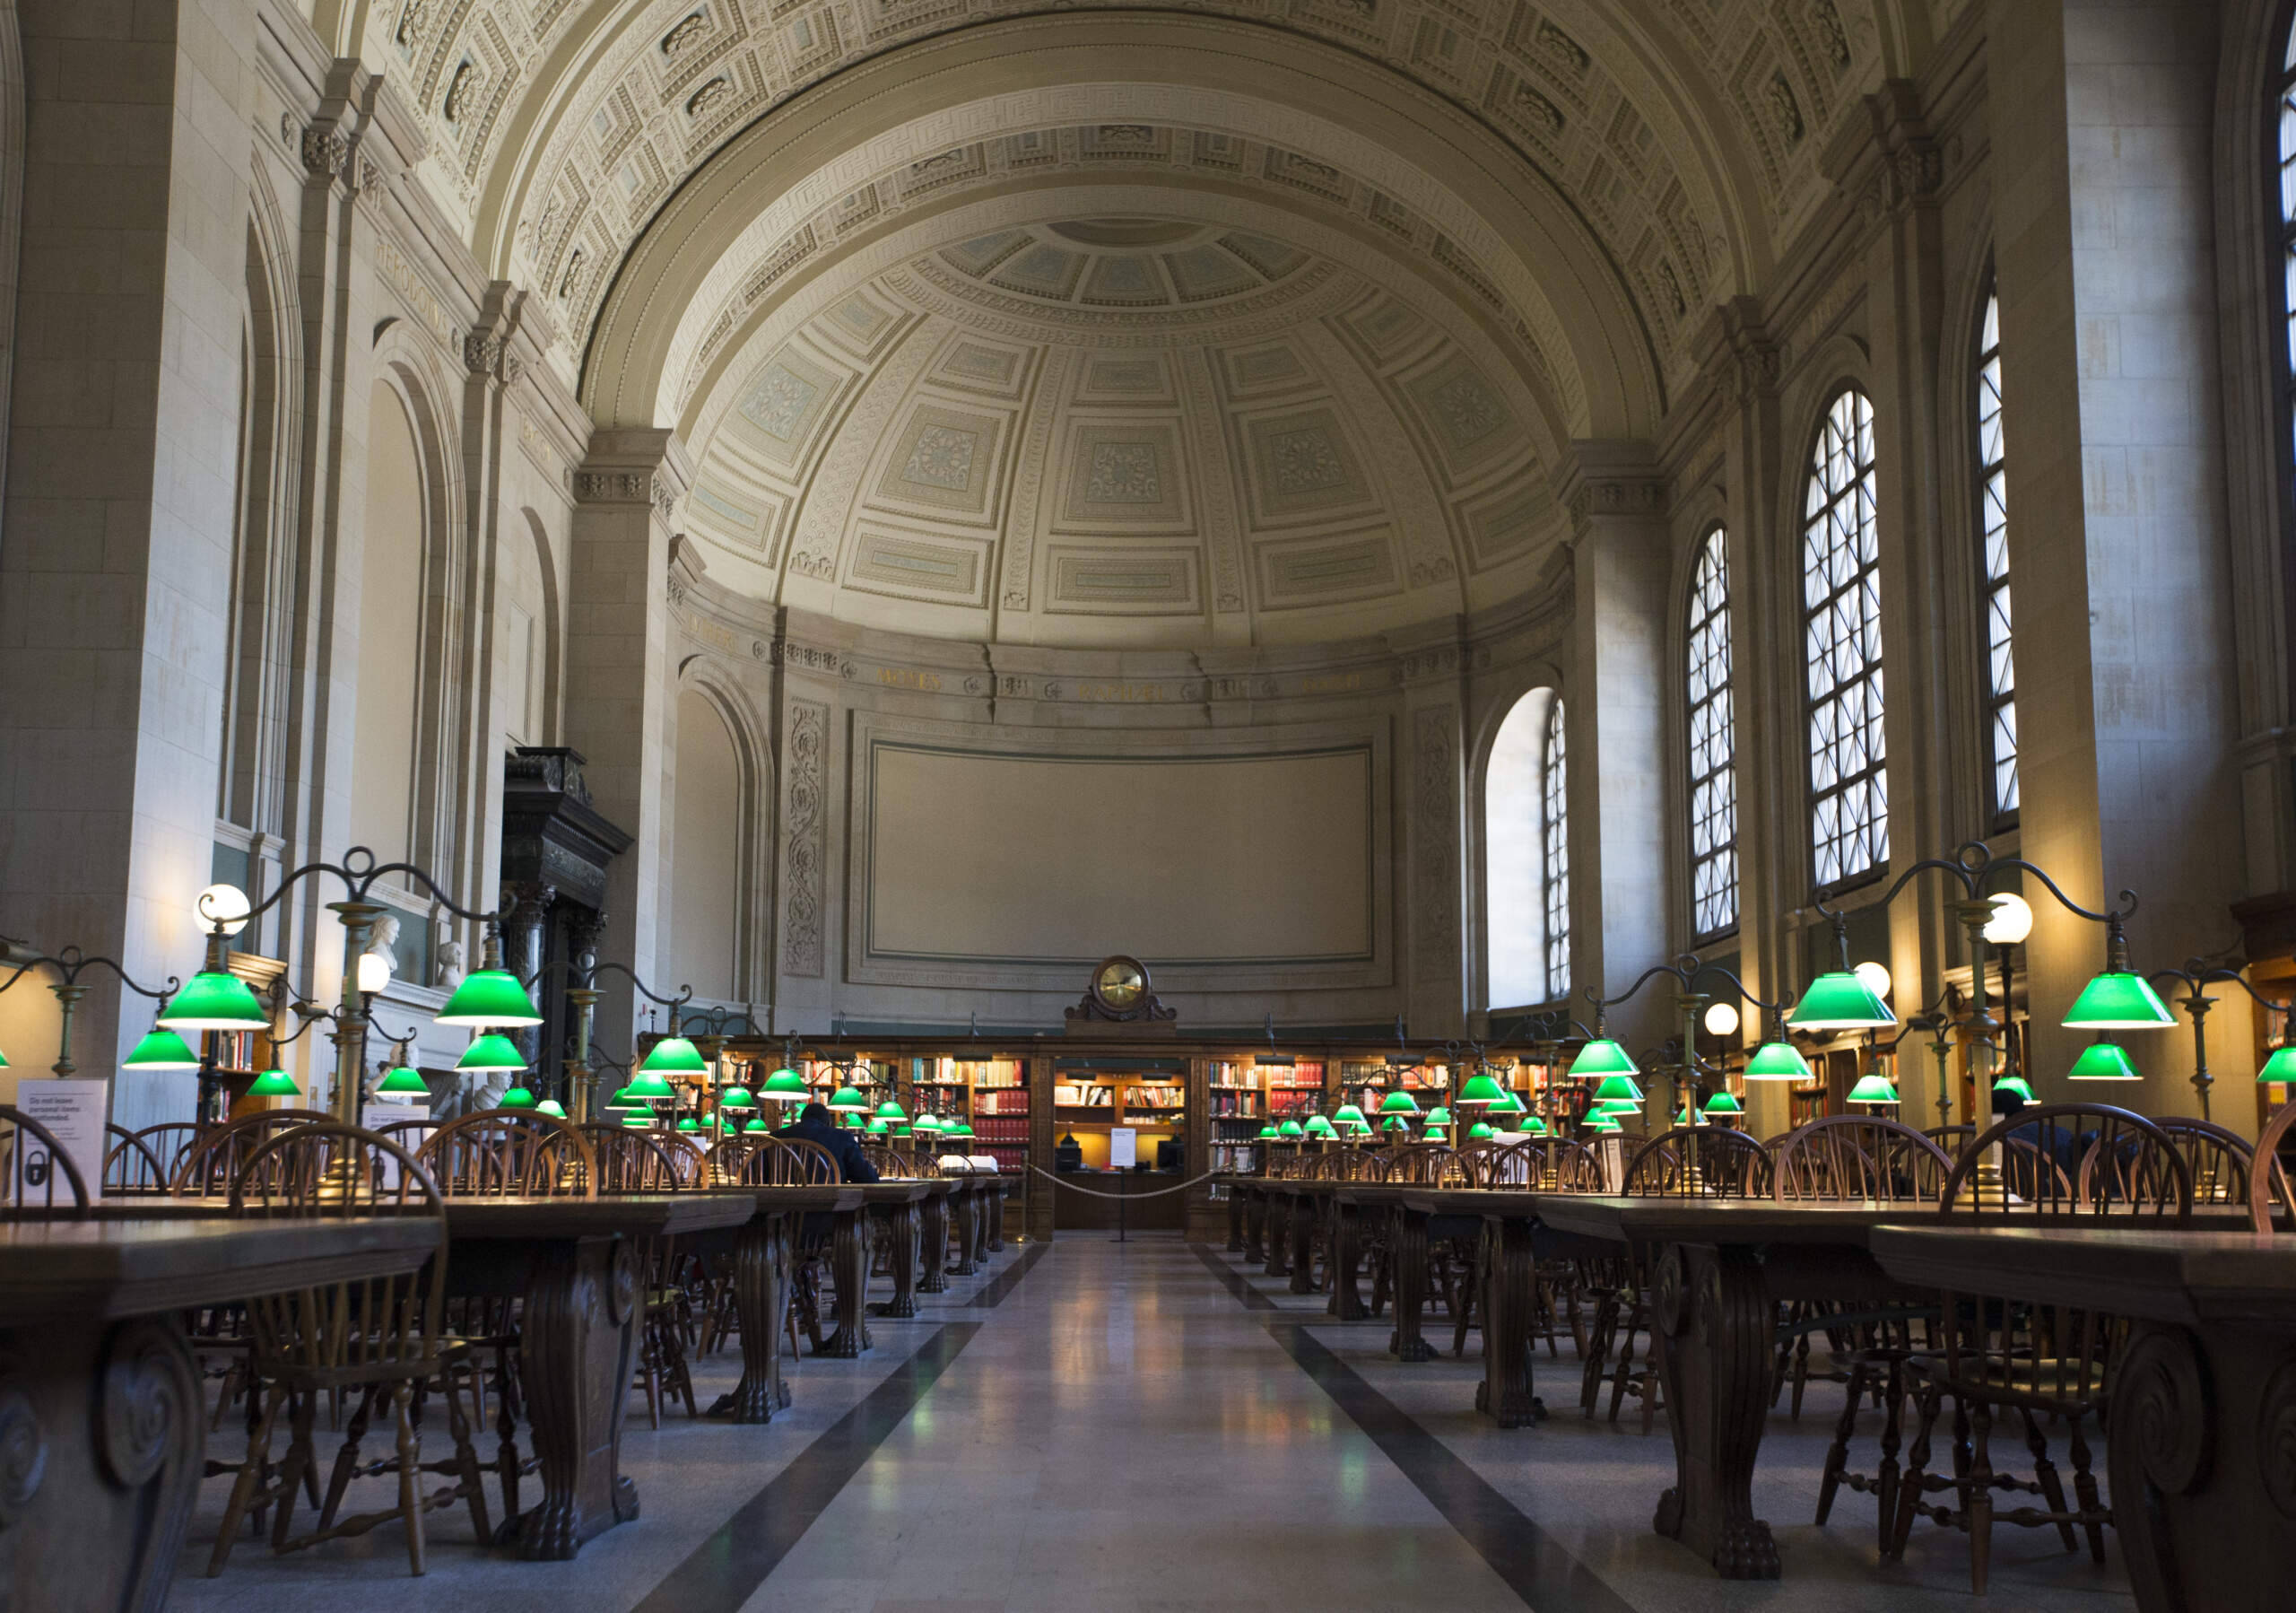 Boston Public Library branches help you check out more than books